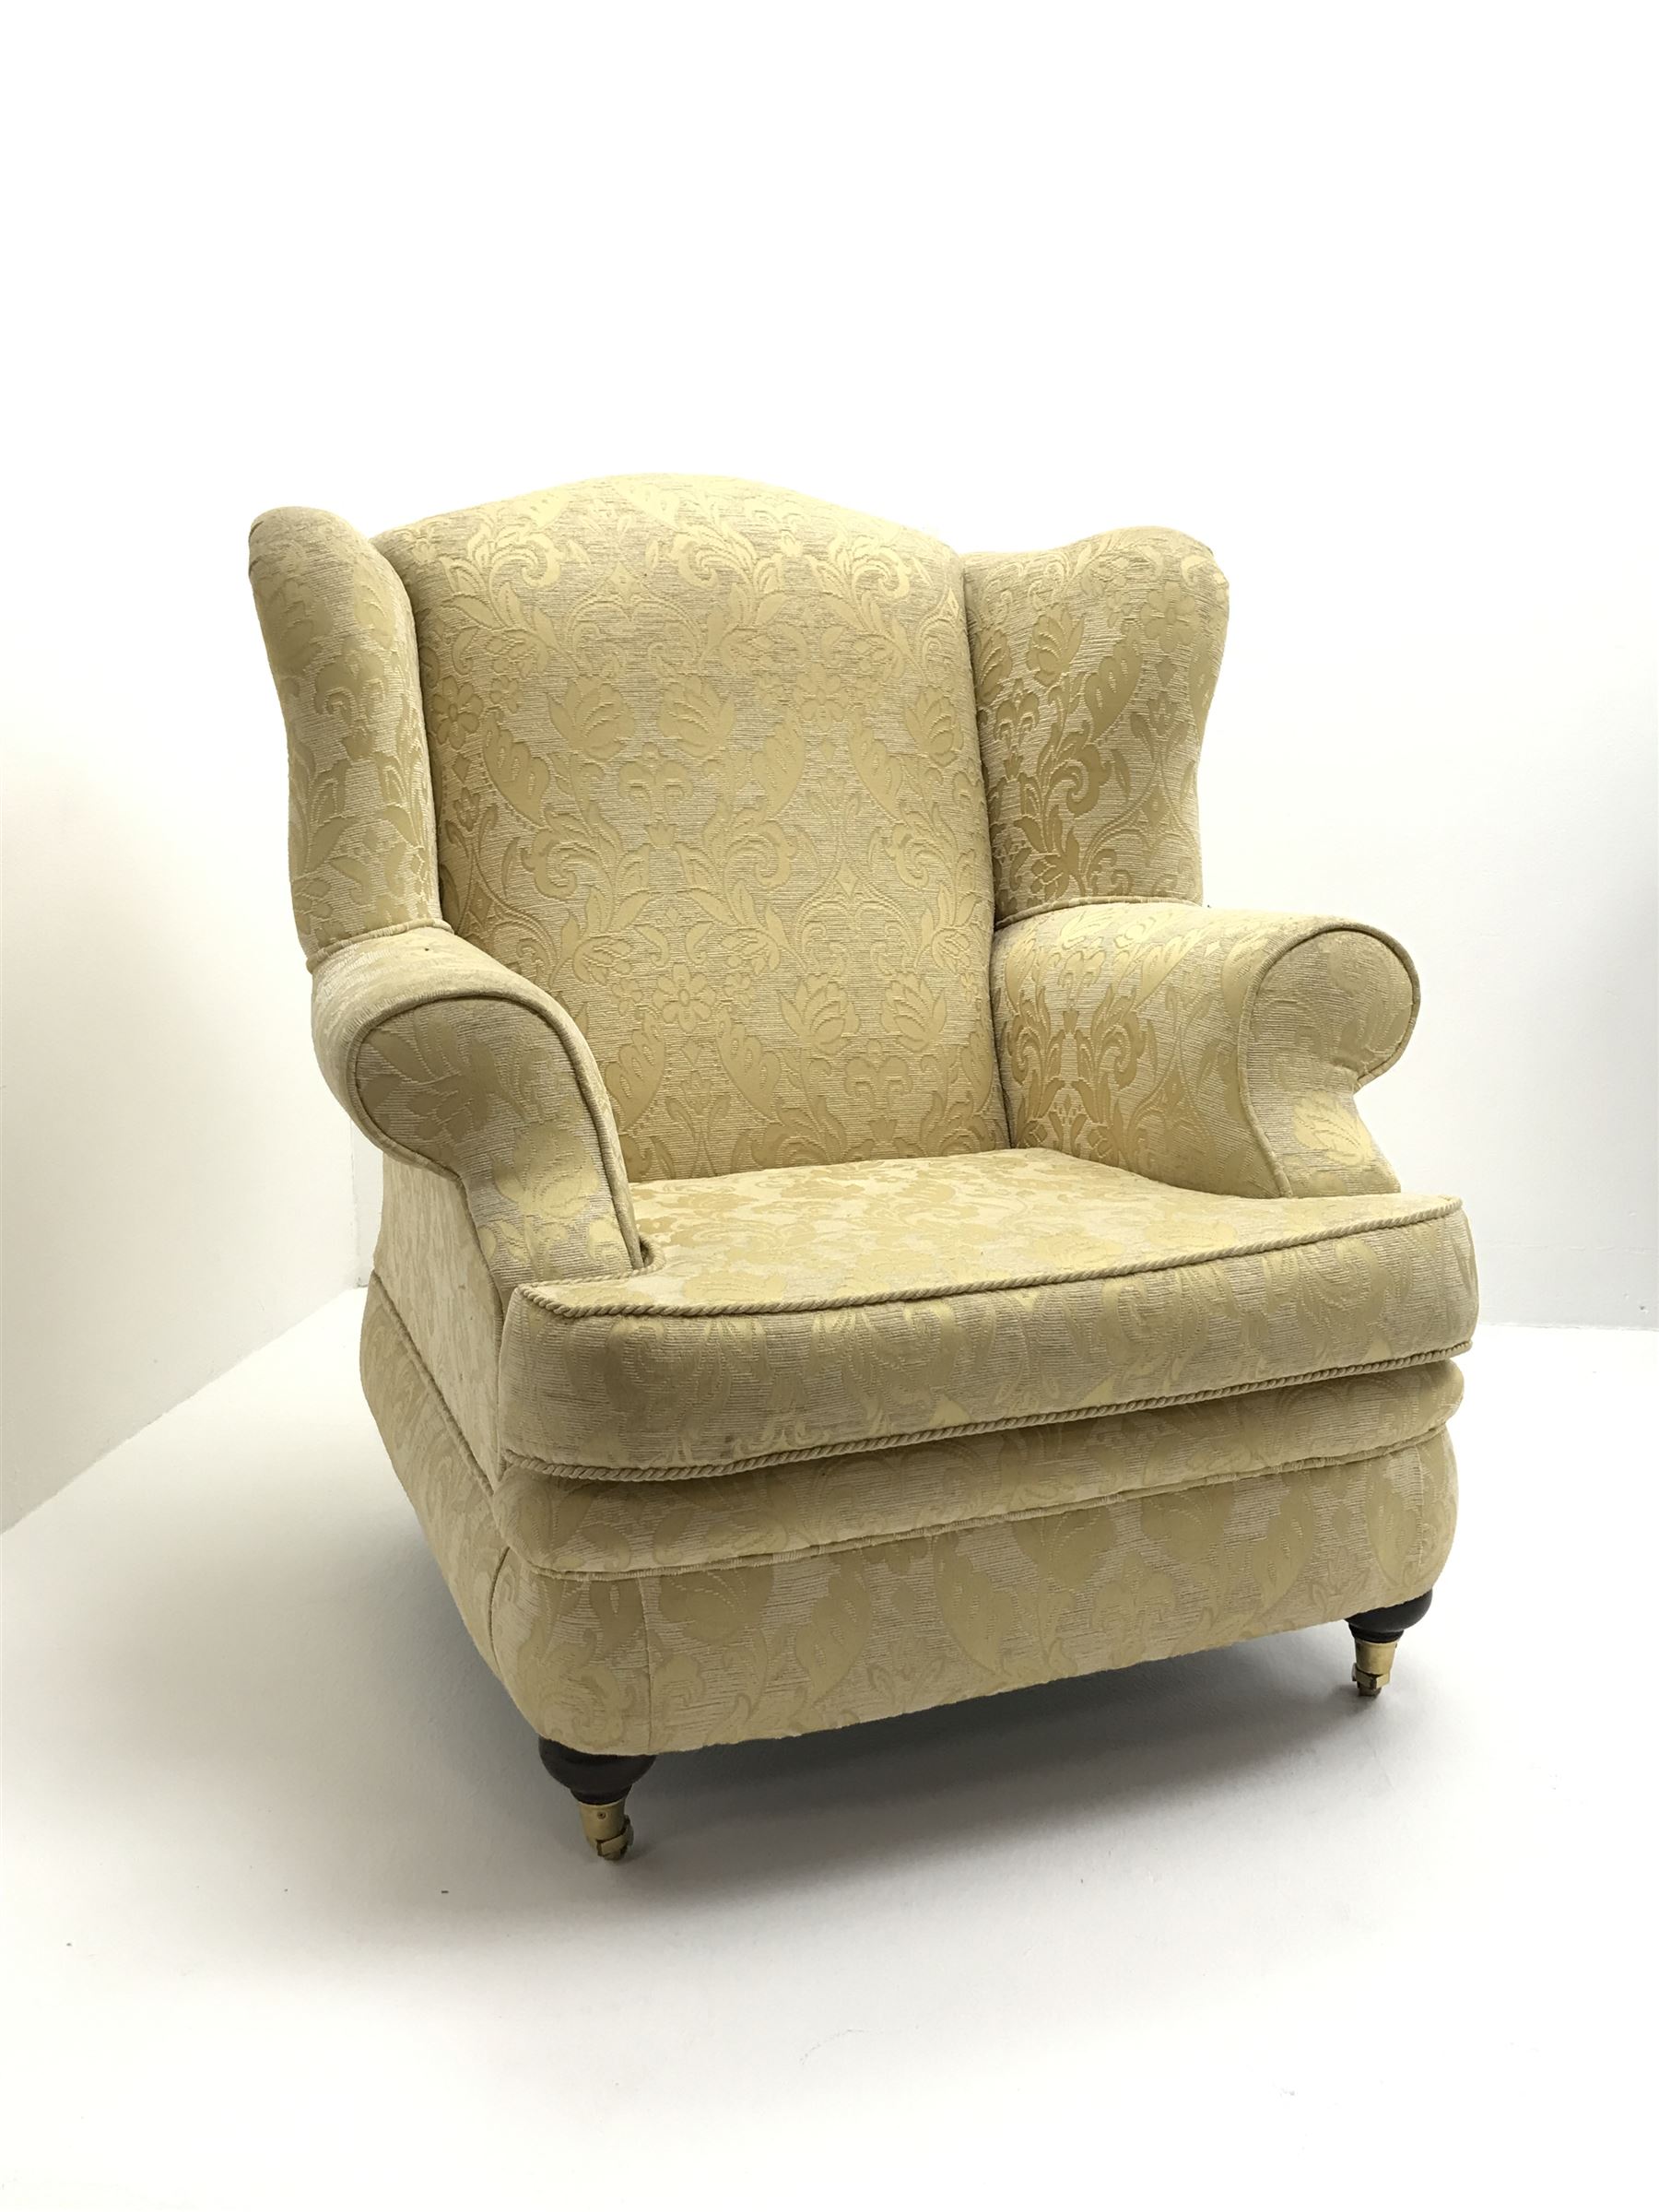 Queen Anne style wing back armchair